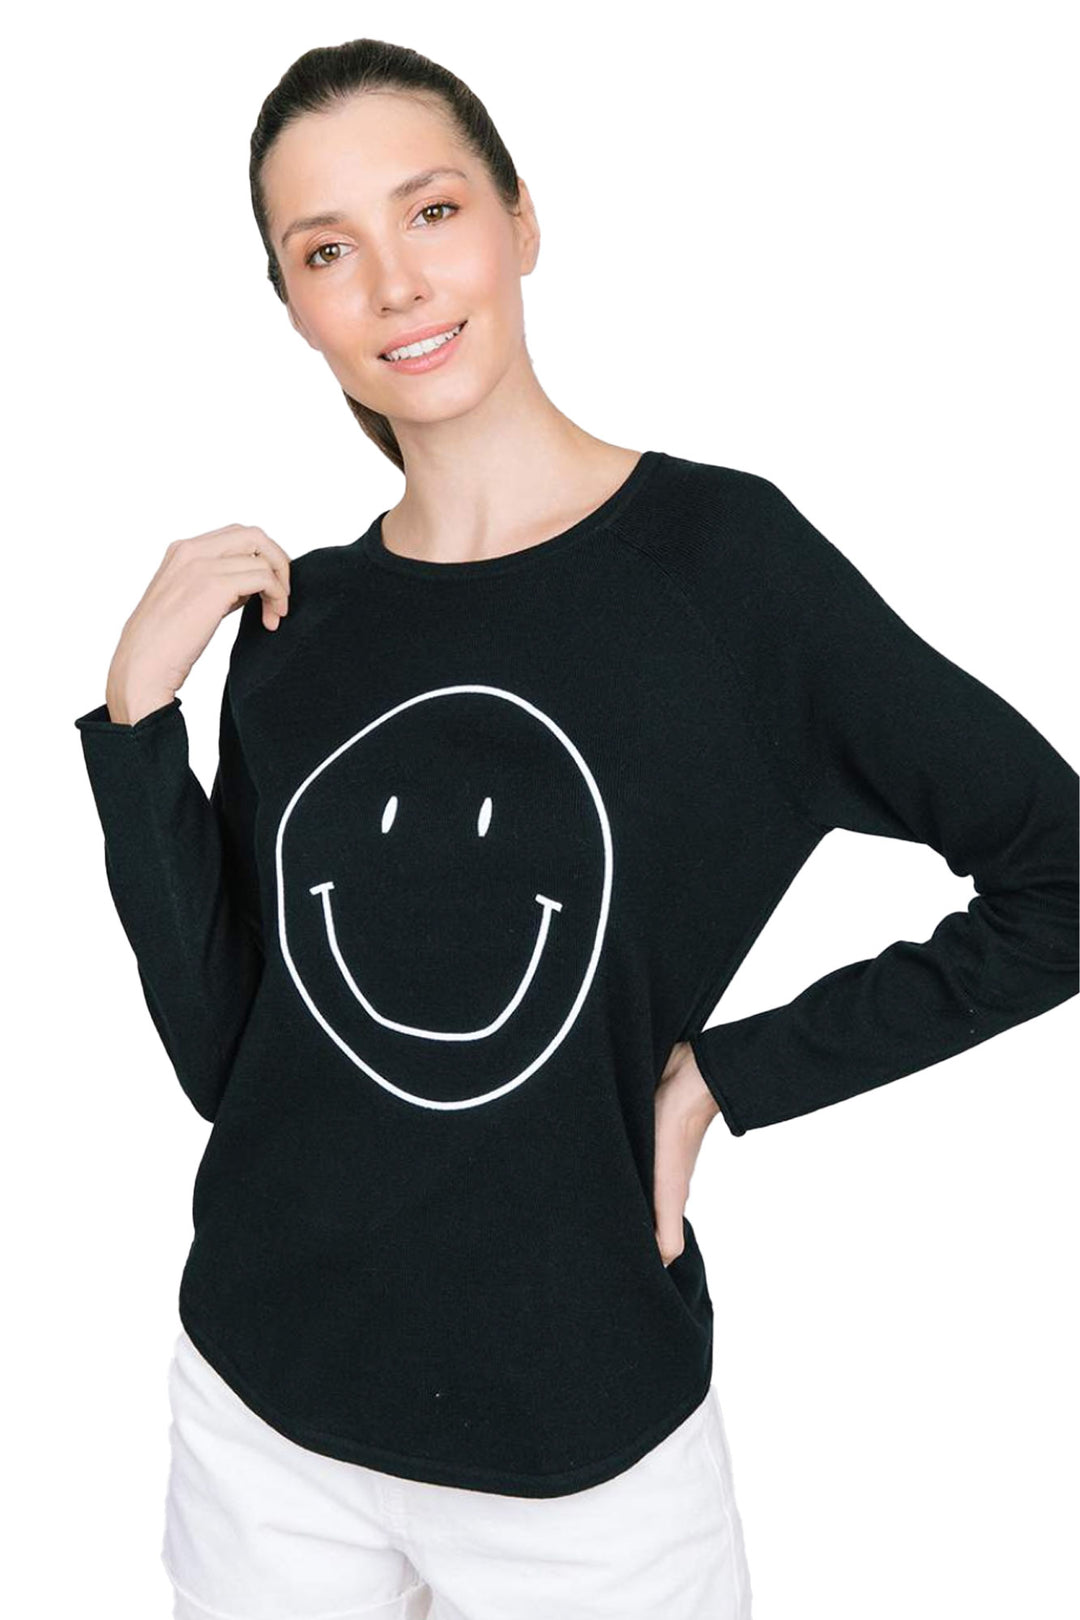 SMILEY FACE SWEATER-BLACK - Kingfisher Road - Online Boutique